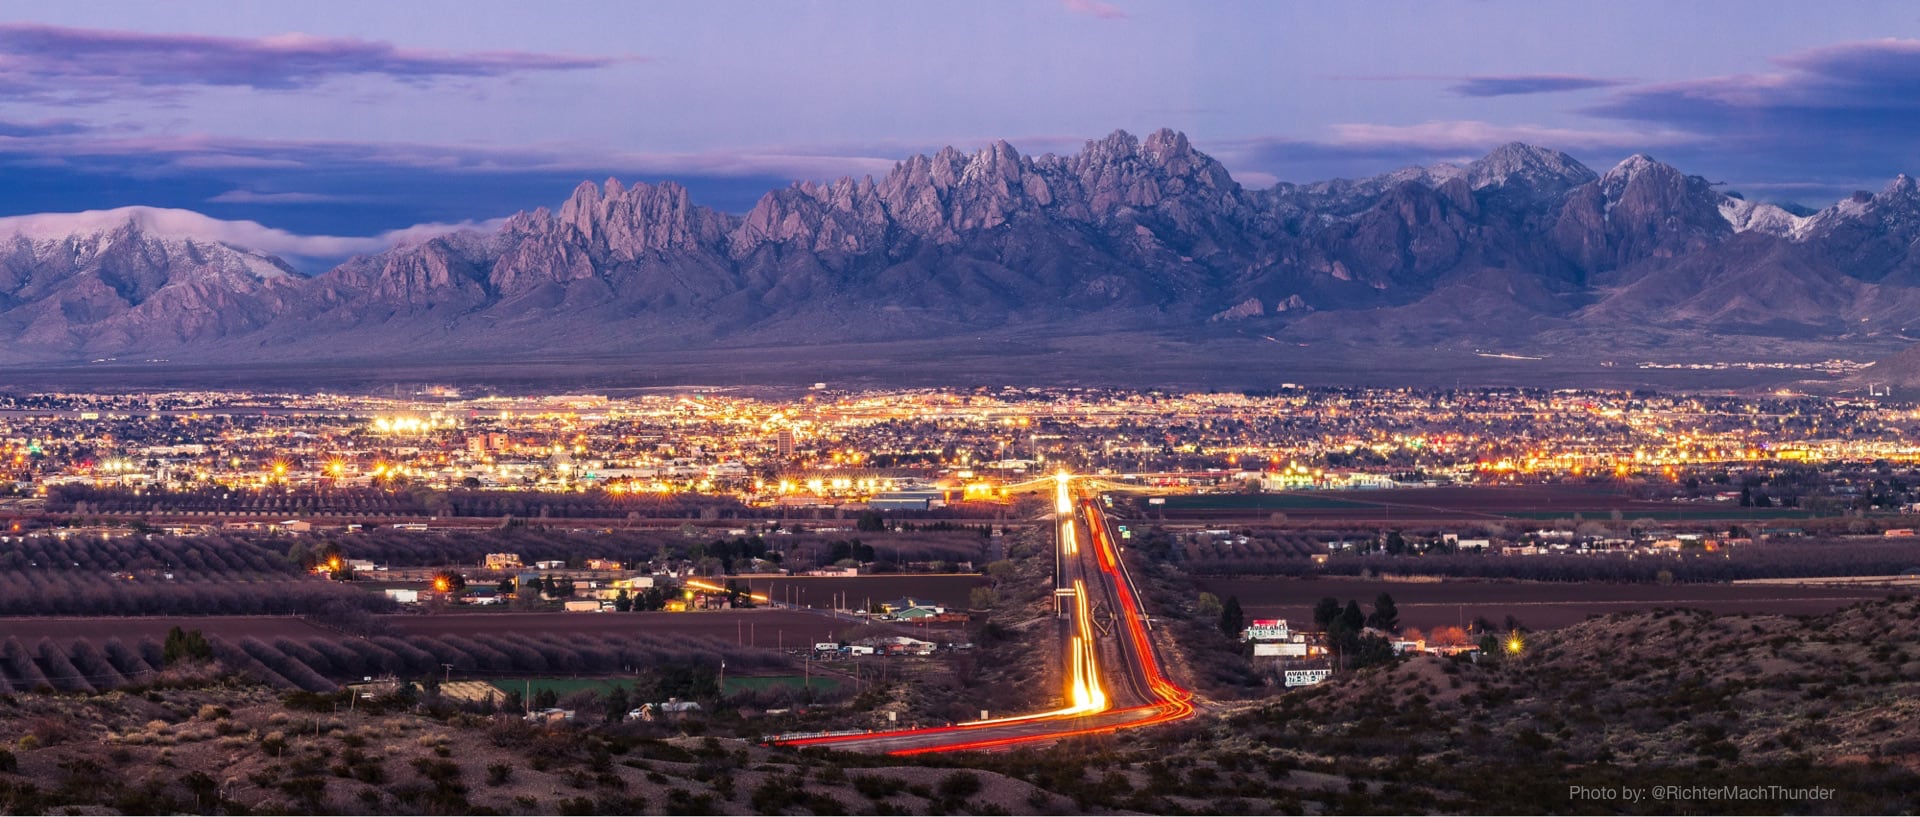 Las Cruces Directory - Local Business Directory - Las Cruces NM